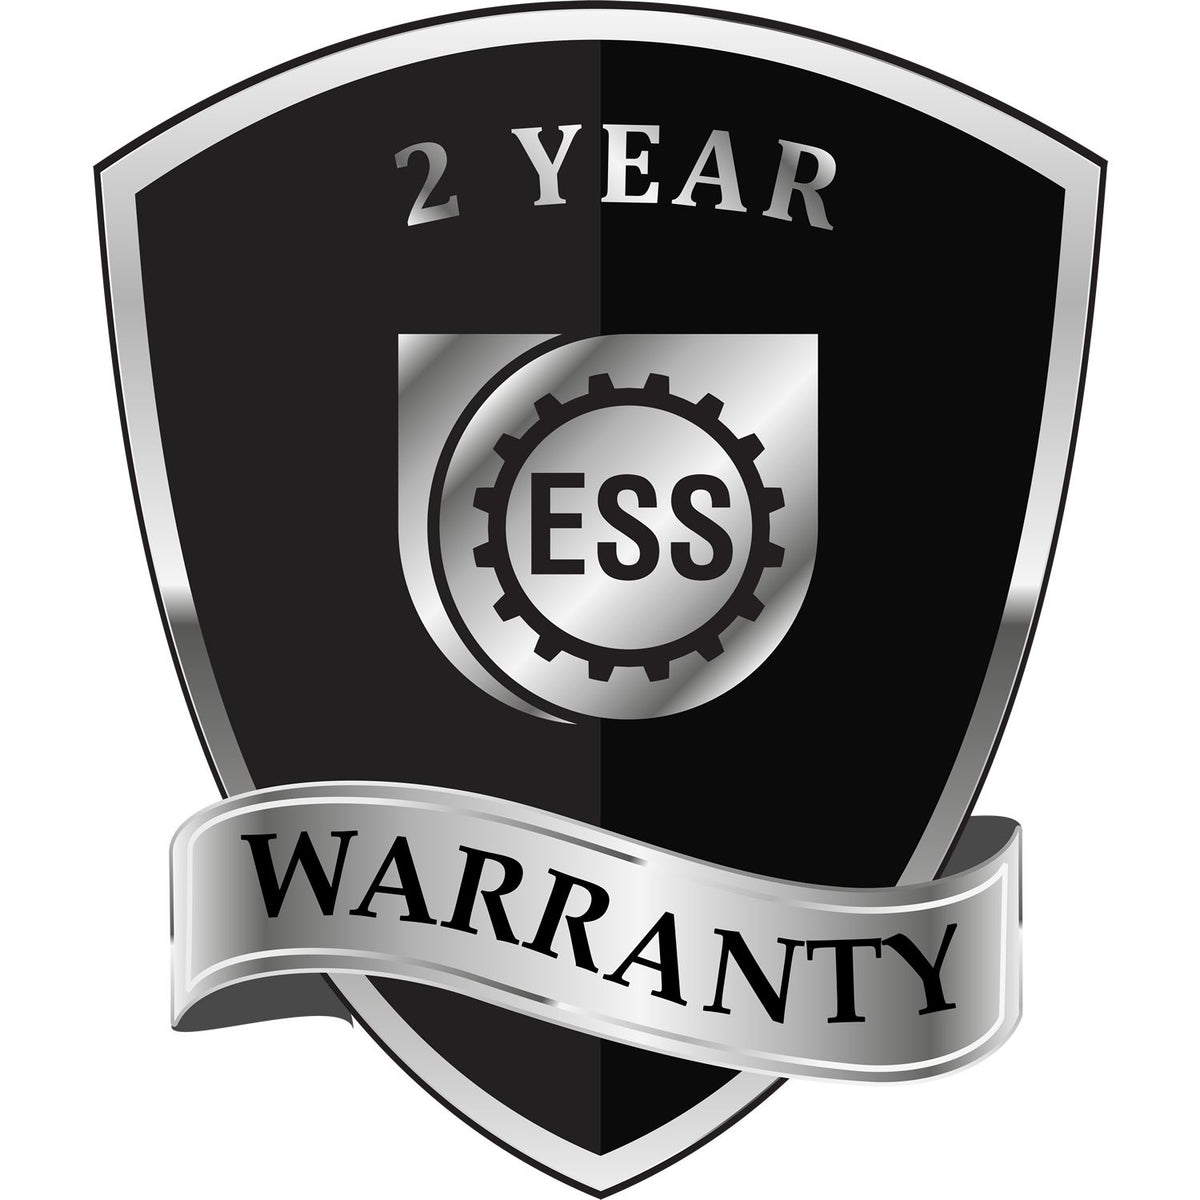 A badge or emblem showing a warranty icon for the State of New Mexico Extended Long Reach Engineer Seal